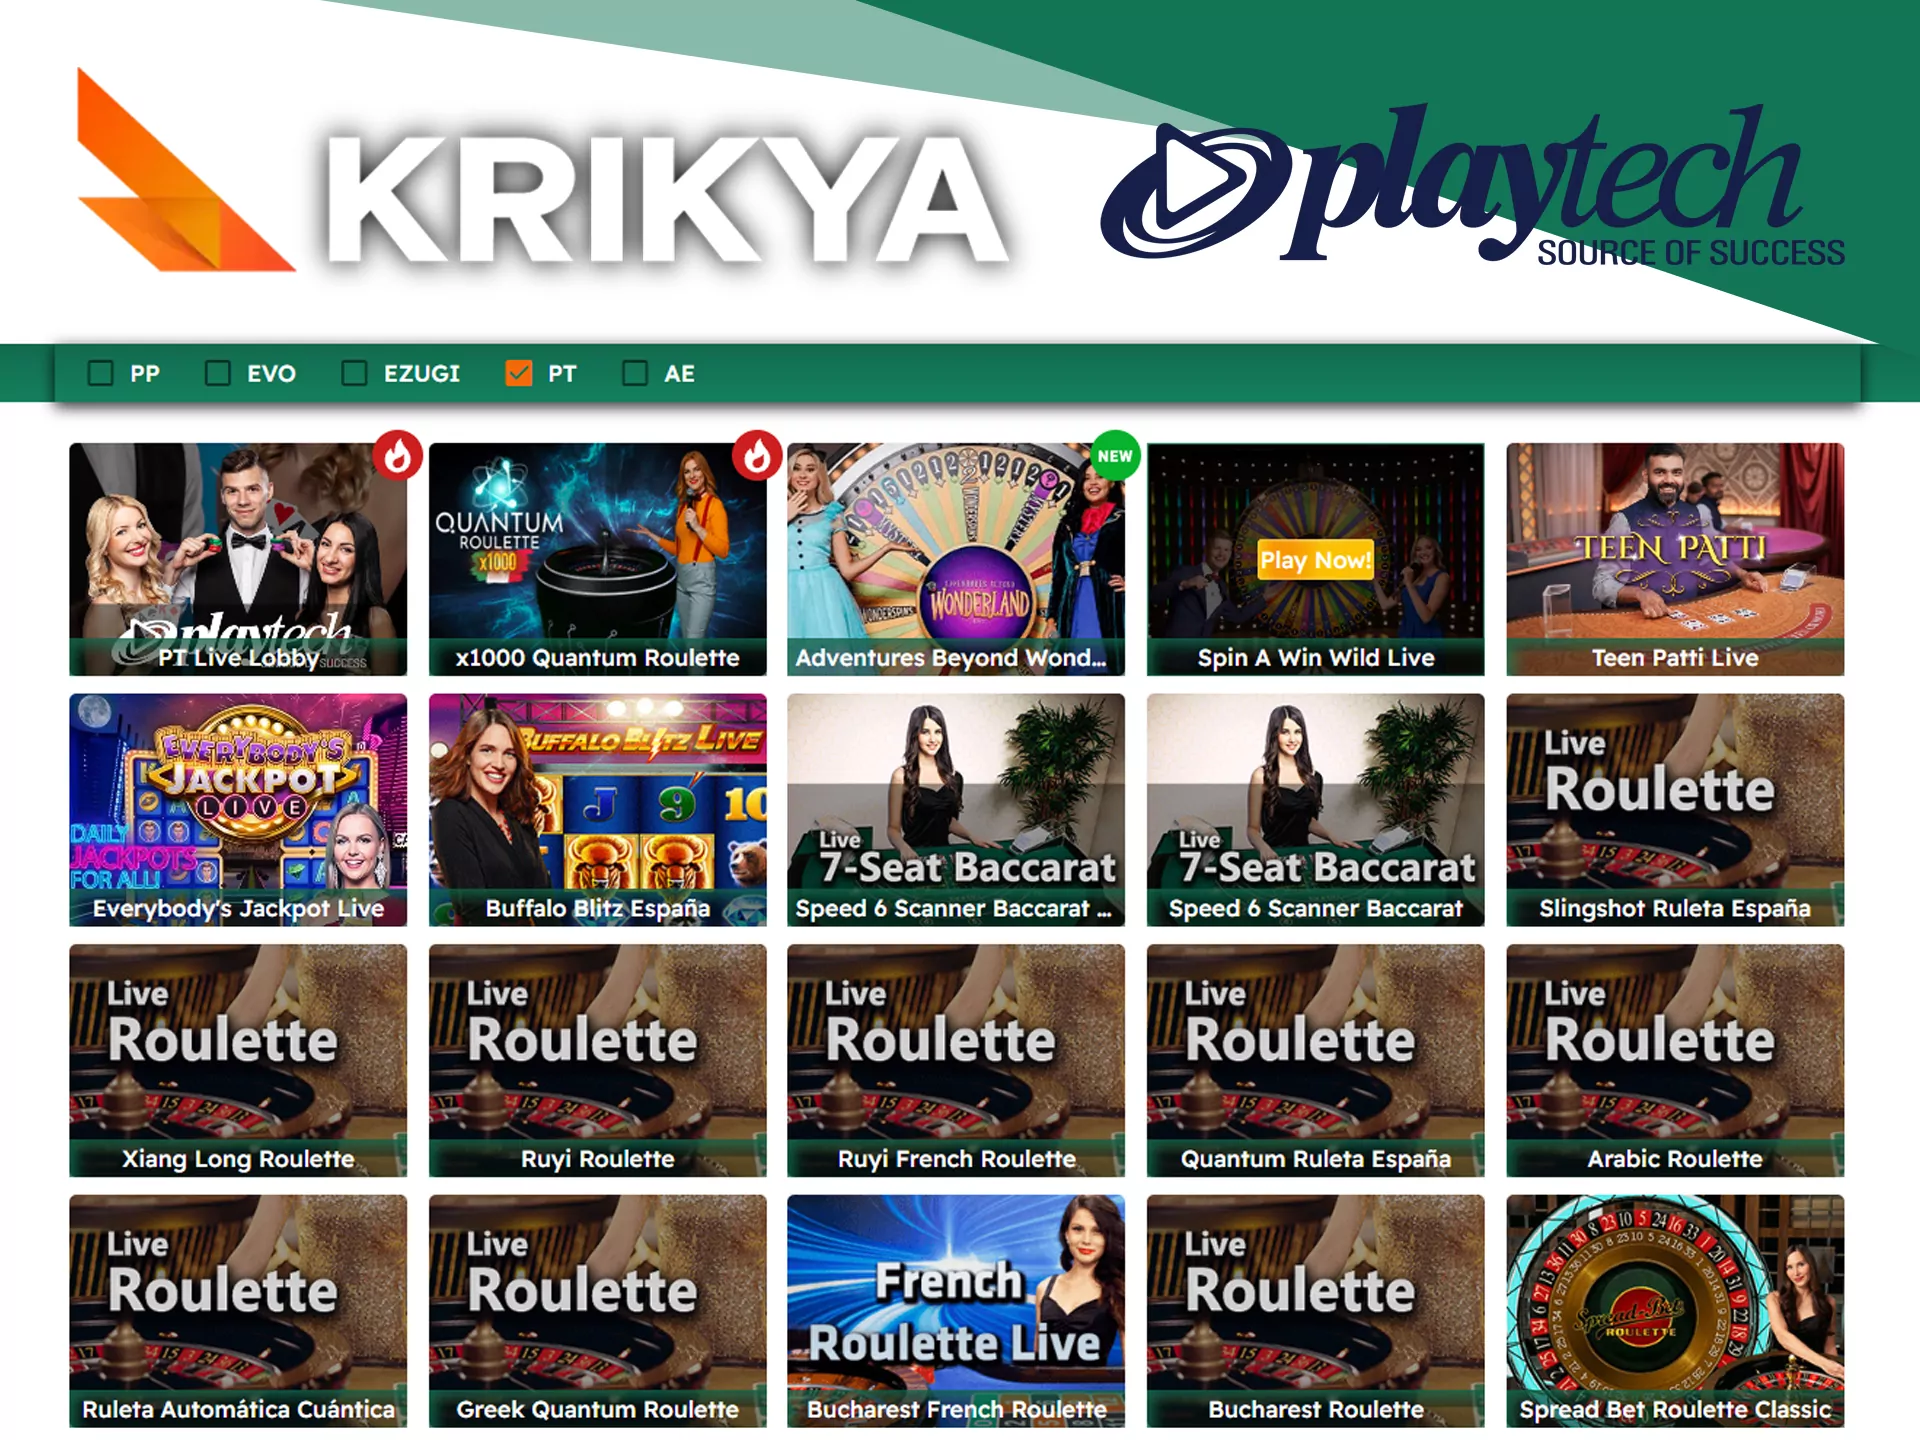 Playtech provide wide choise of live casino games.